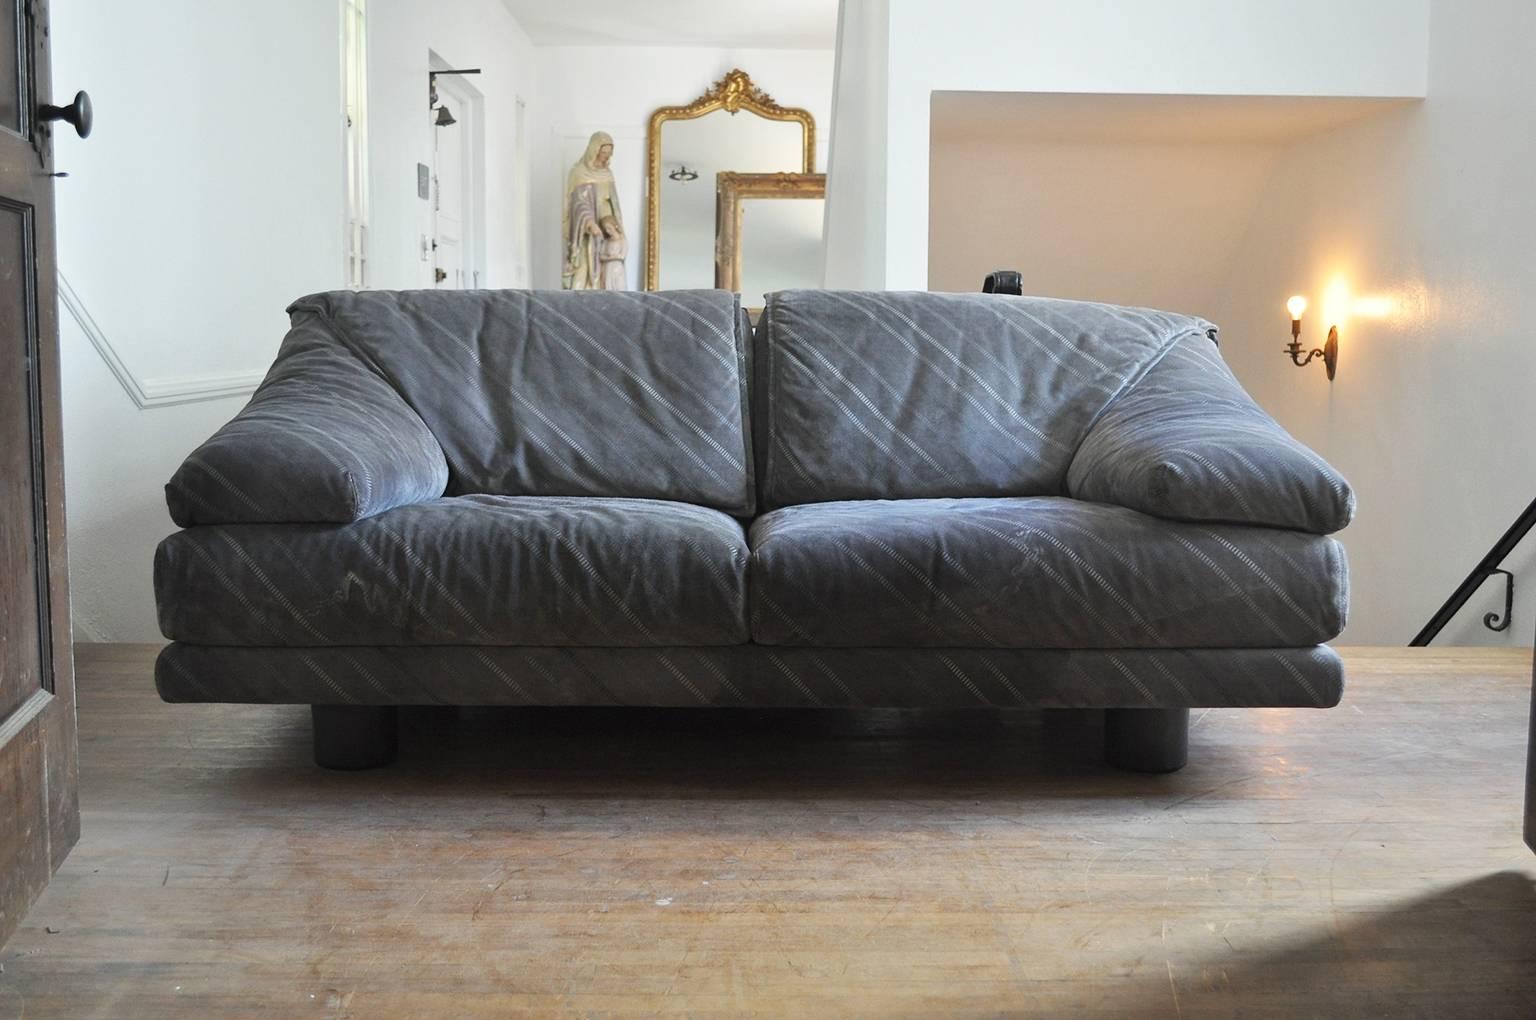 Saporiti Italia two-seat sofa in grey suede and black iconic cylindrical legs. Original manufacture labels attached.